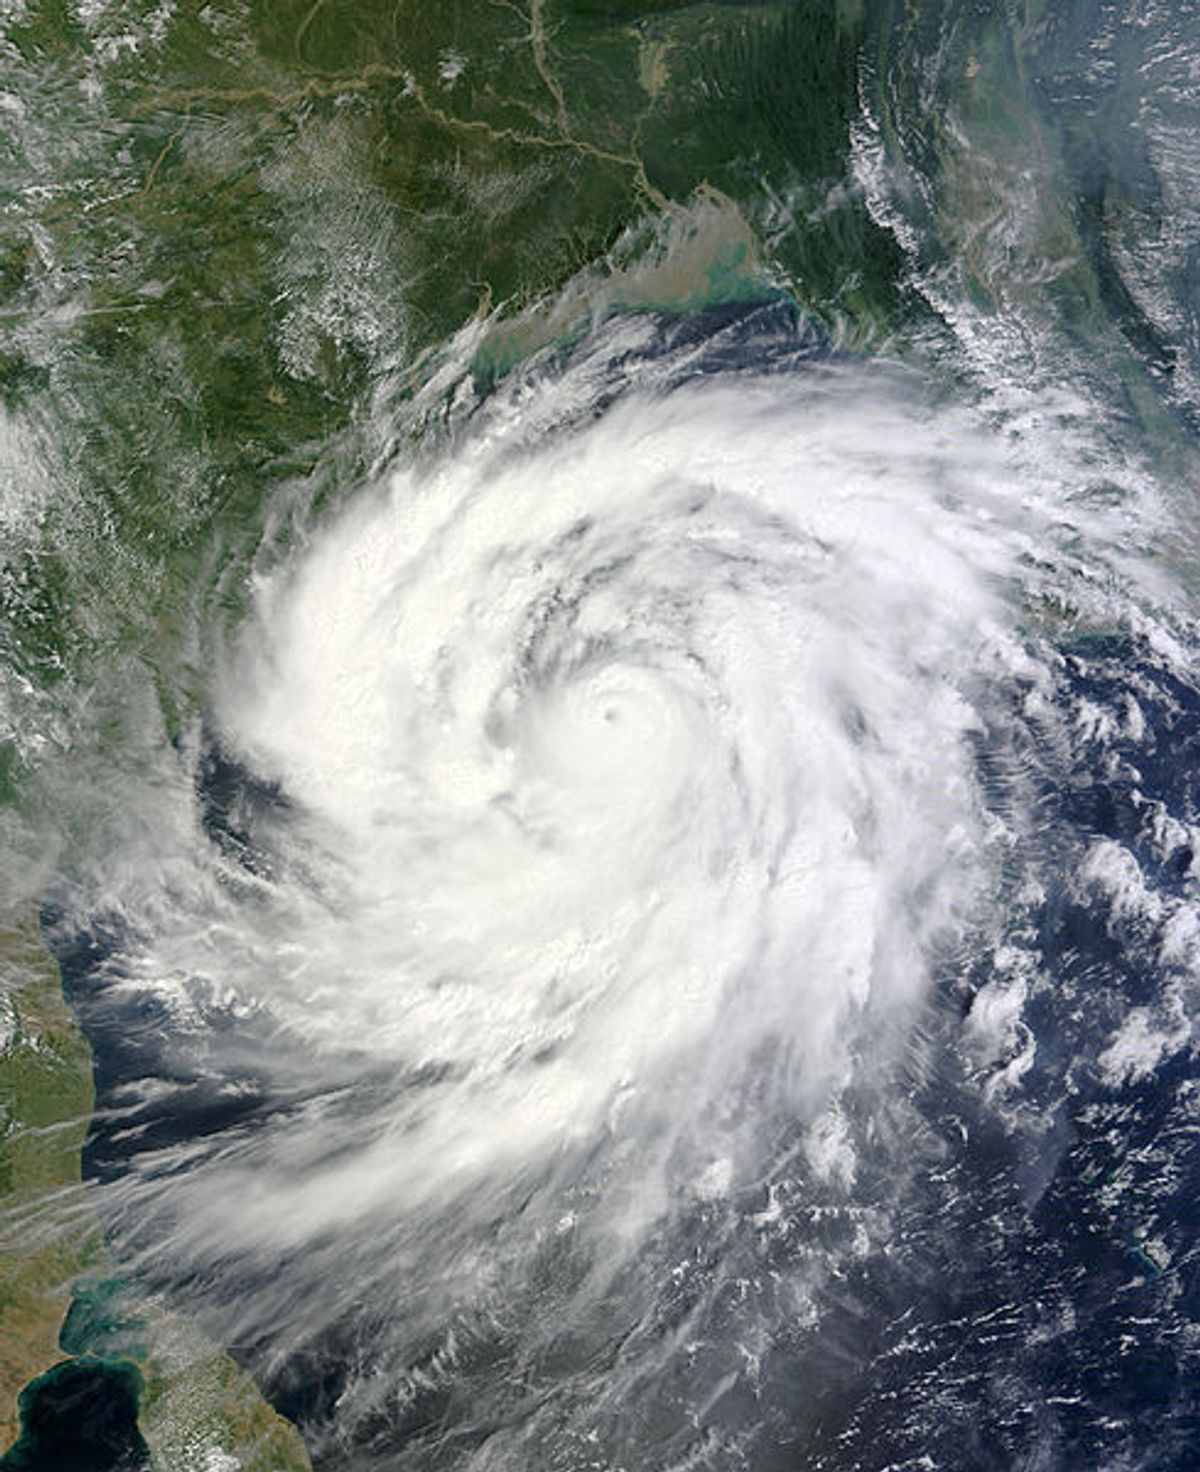 Cyclone Phailin over the Bay of Bengal on 11 October 2013. At the time the image was taken, Phailin was a violent Category 4 equivalent tropical cyclone with 1-min winds peaking at 250 km/h (155 mph) and a central pressure of 940 millibars.  (Wikimedia Commons)